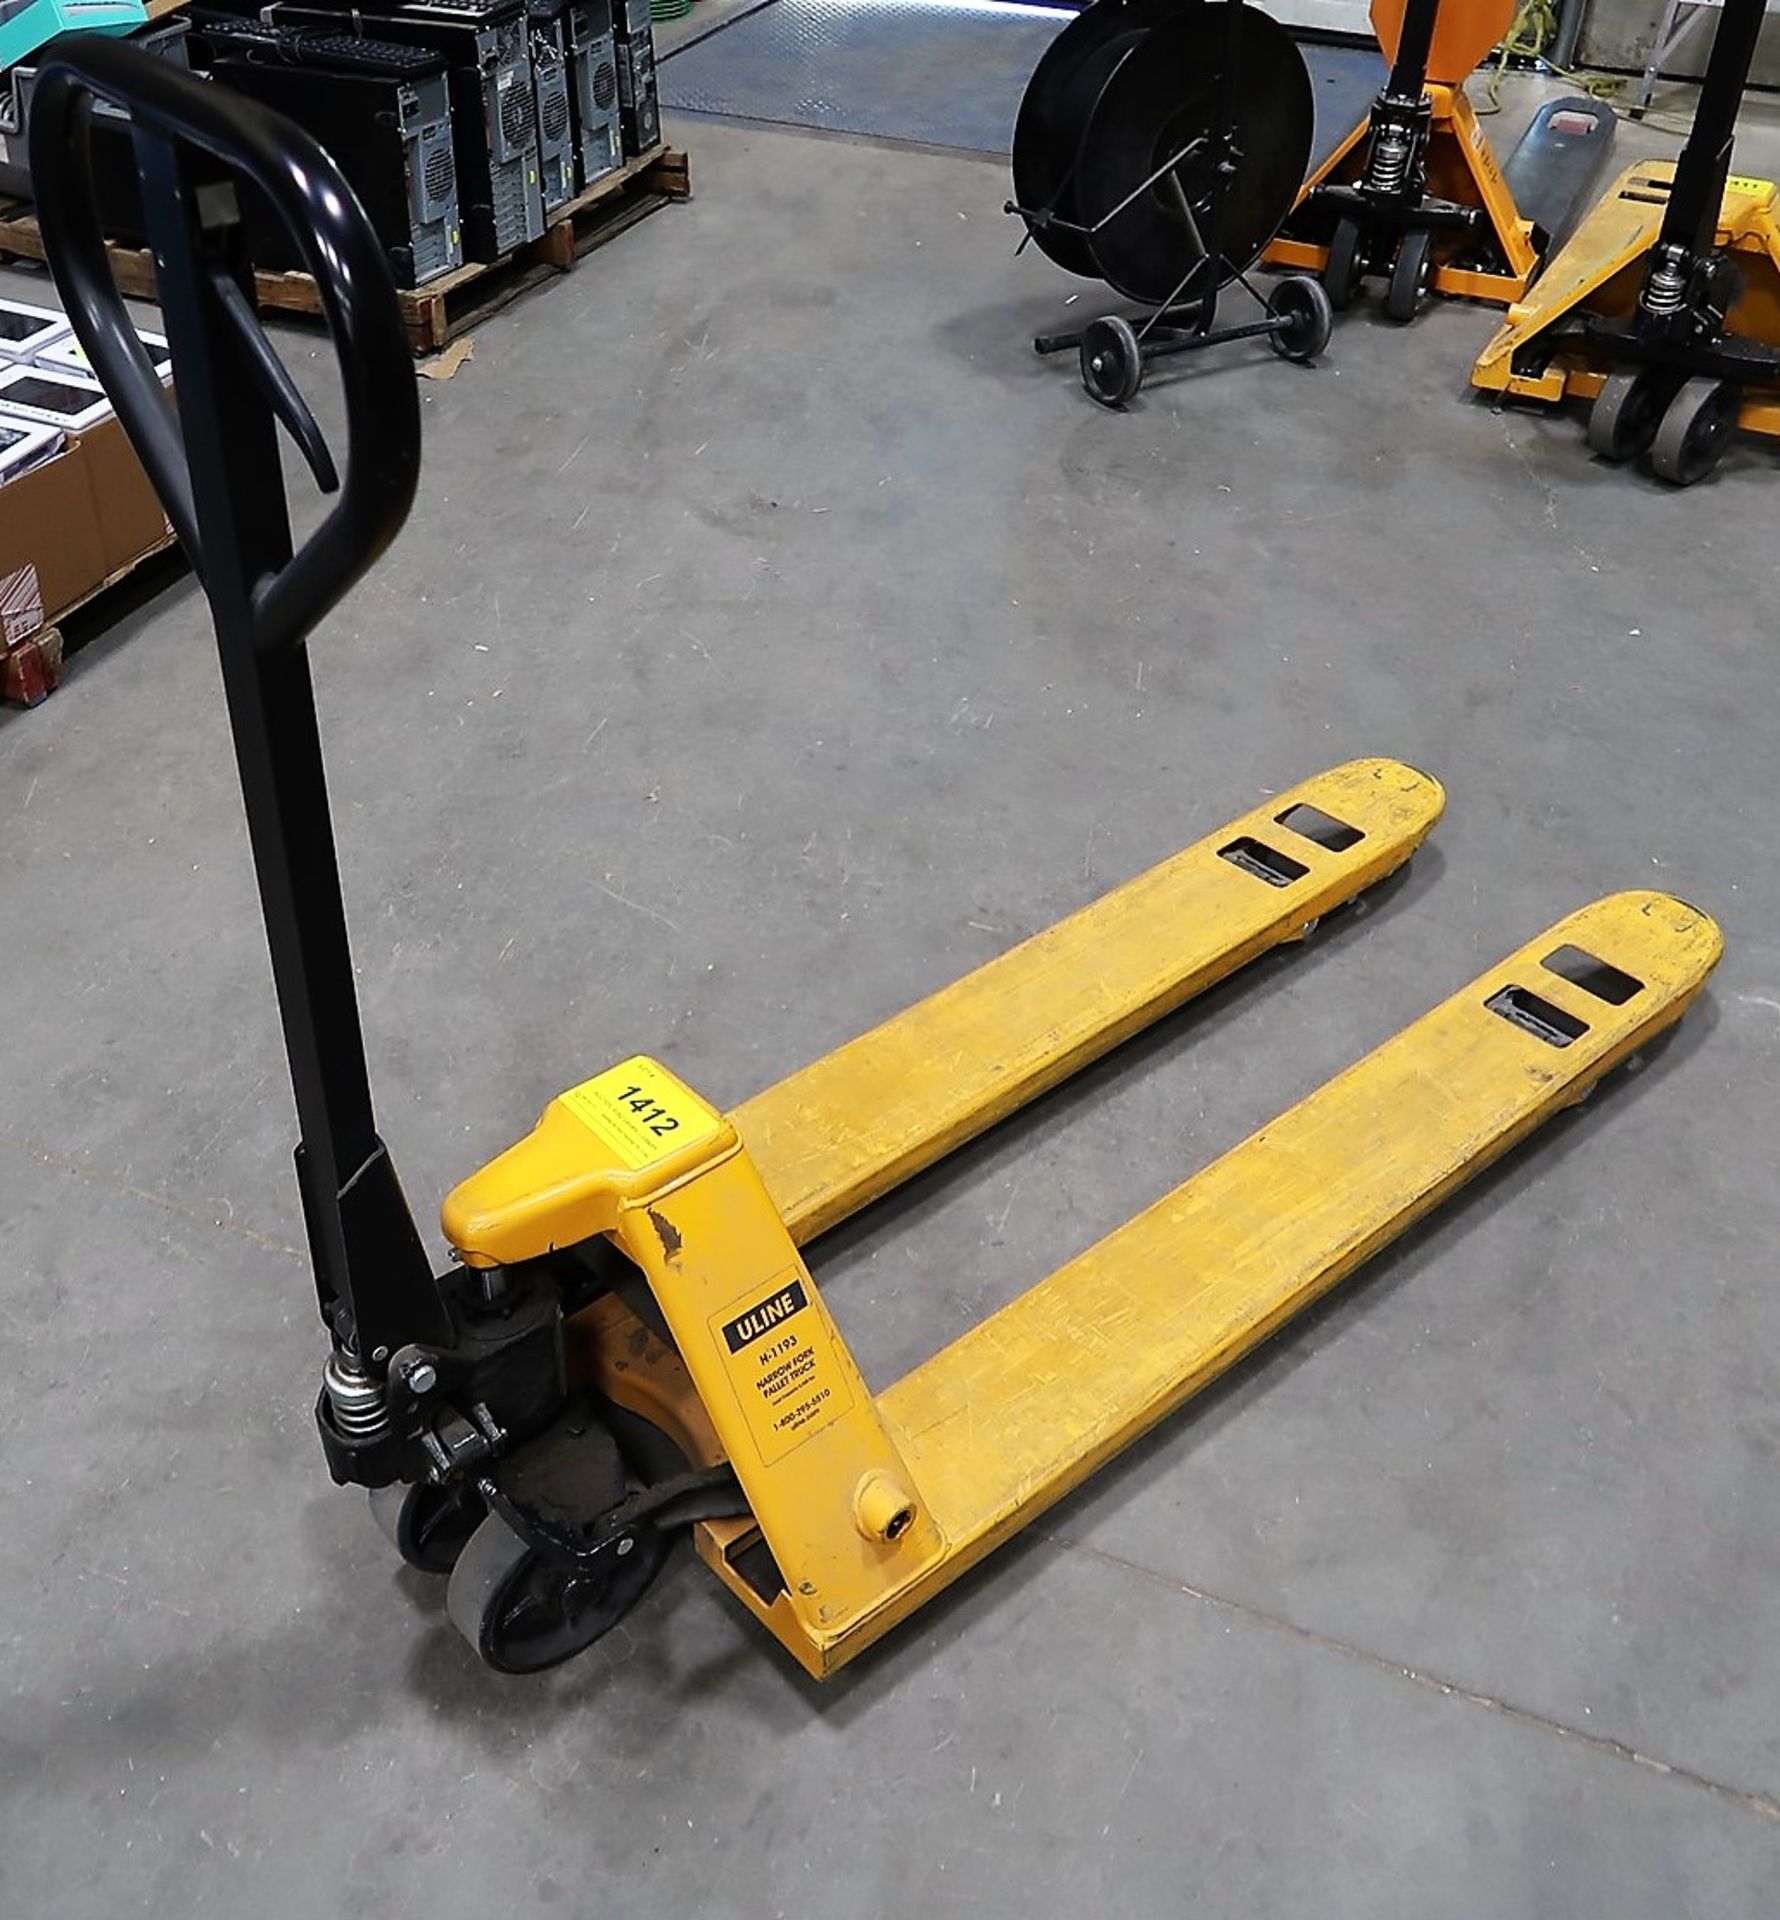 ULINE H-1193 NARROW FORK PALLET JACK (SUBJECT TO LATE REMOVAL, PICKUP ON JULY 7TH)